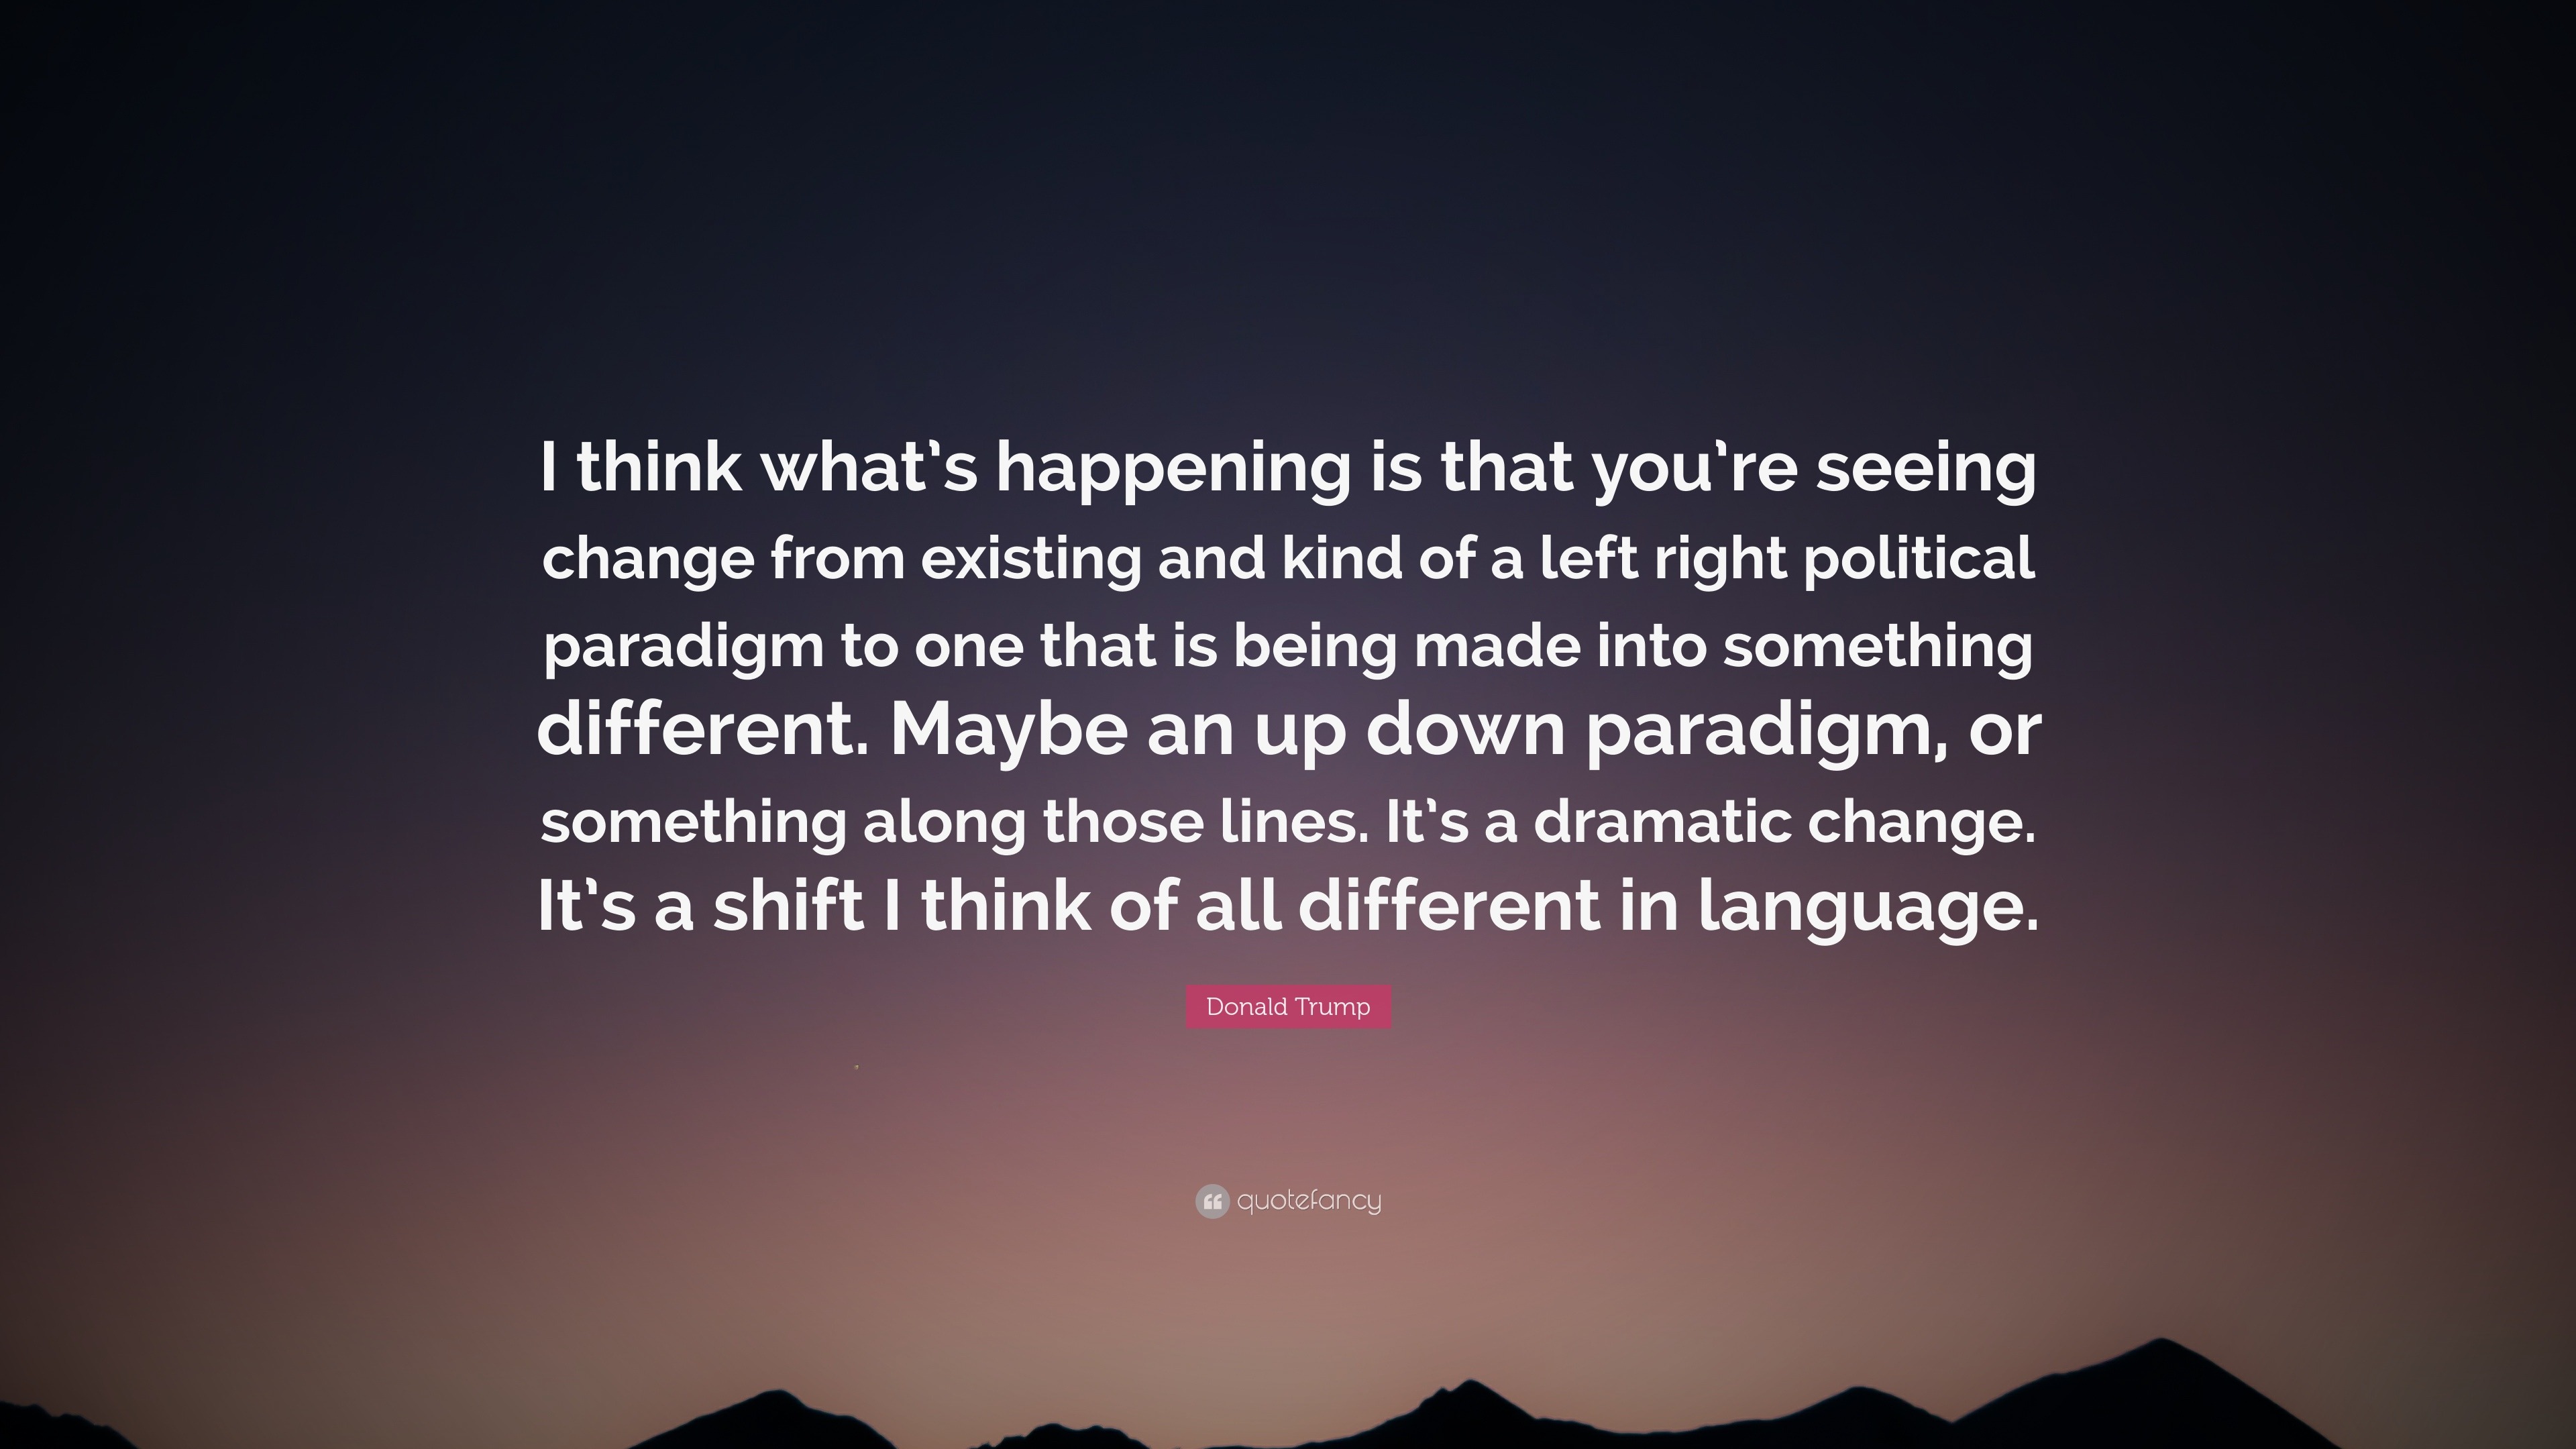 Donald Trump Quote: “I think what’s happening is that you’re seeing ...